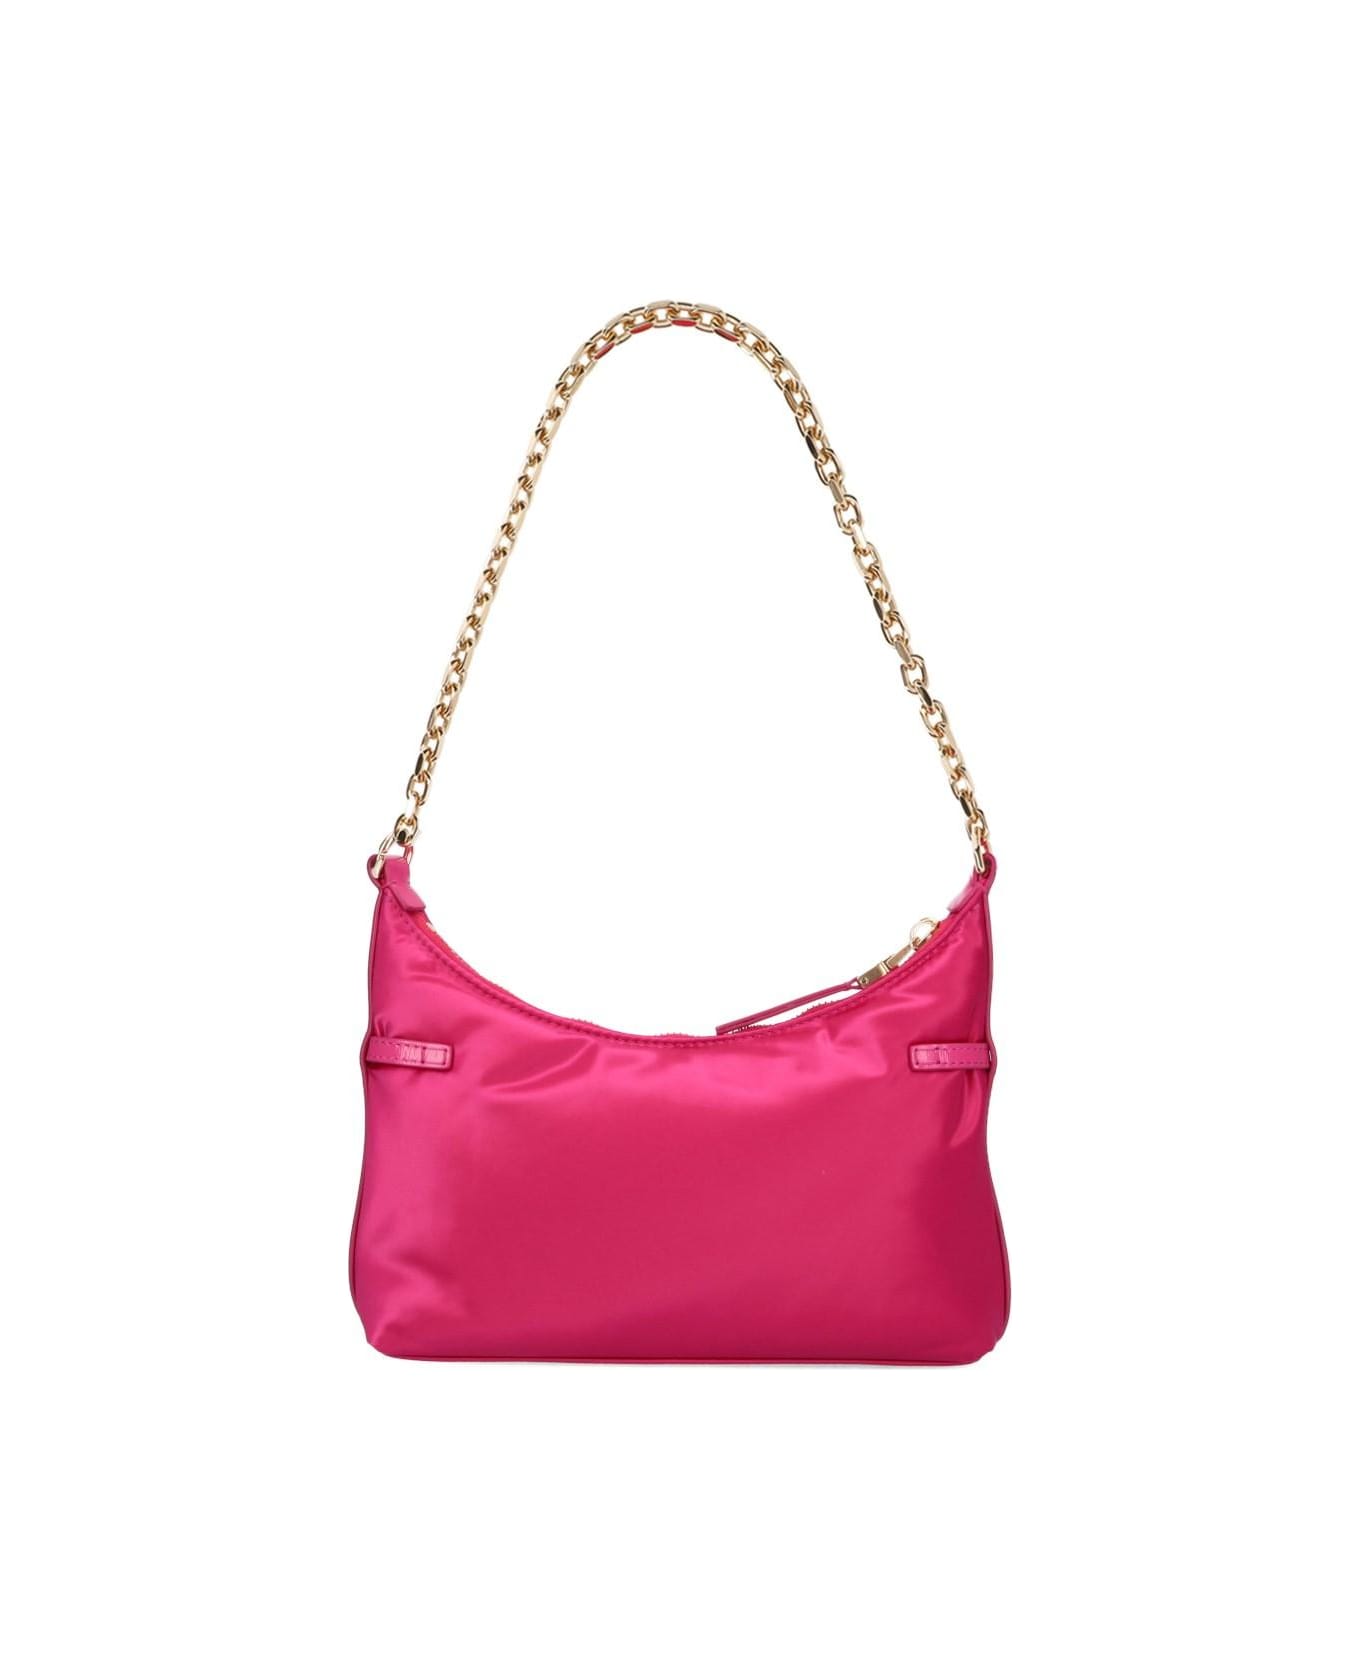 Givenchy 'voyou Party' Bag - PINK